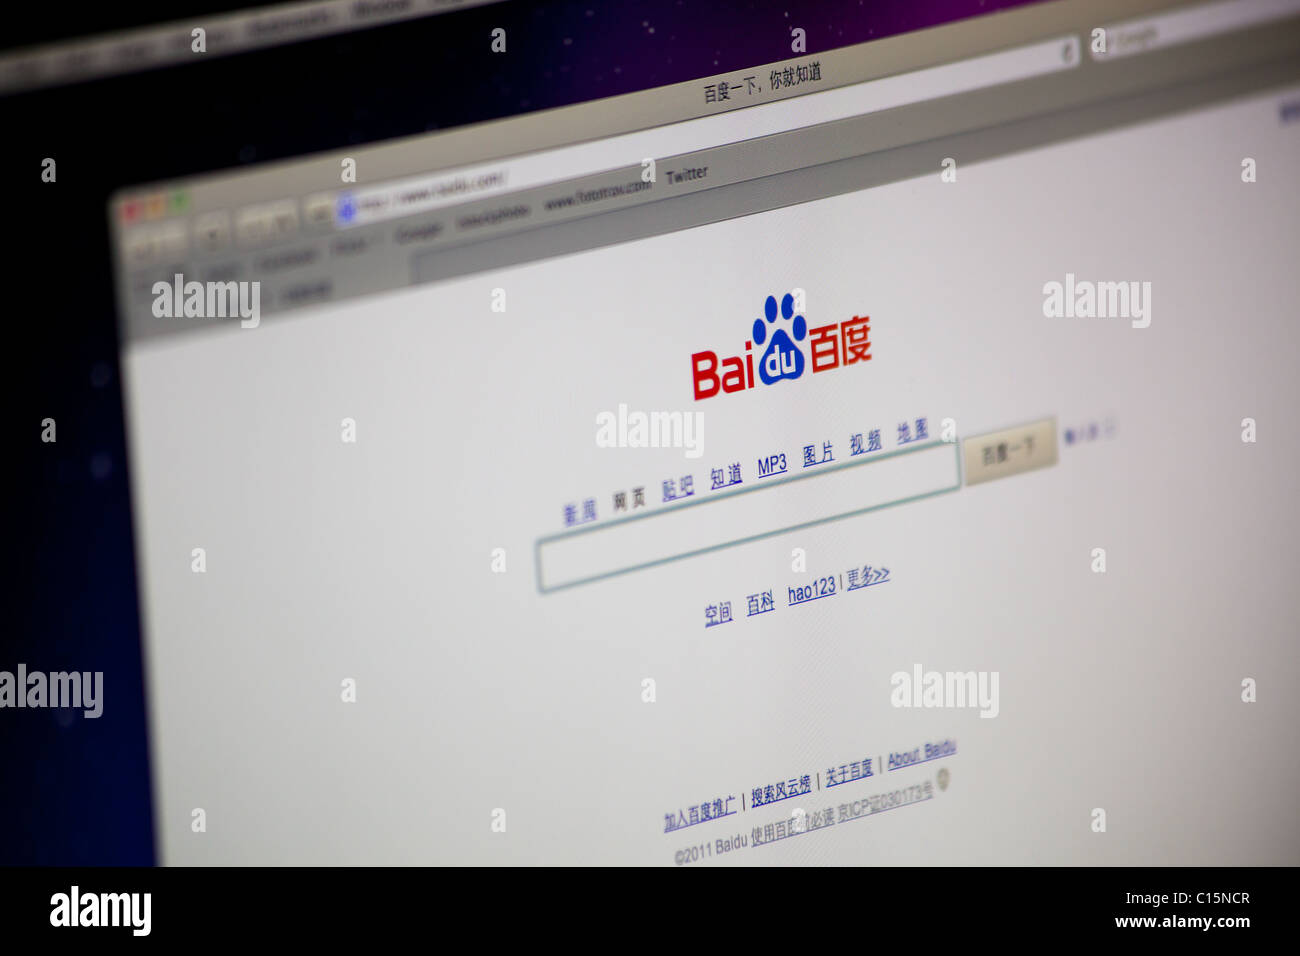 aidu homepage viewed from a LCD screen laptop. Baidu is the largest search  engine in China and known as the "Chinese Google". It Stock Photo - Alamy